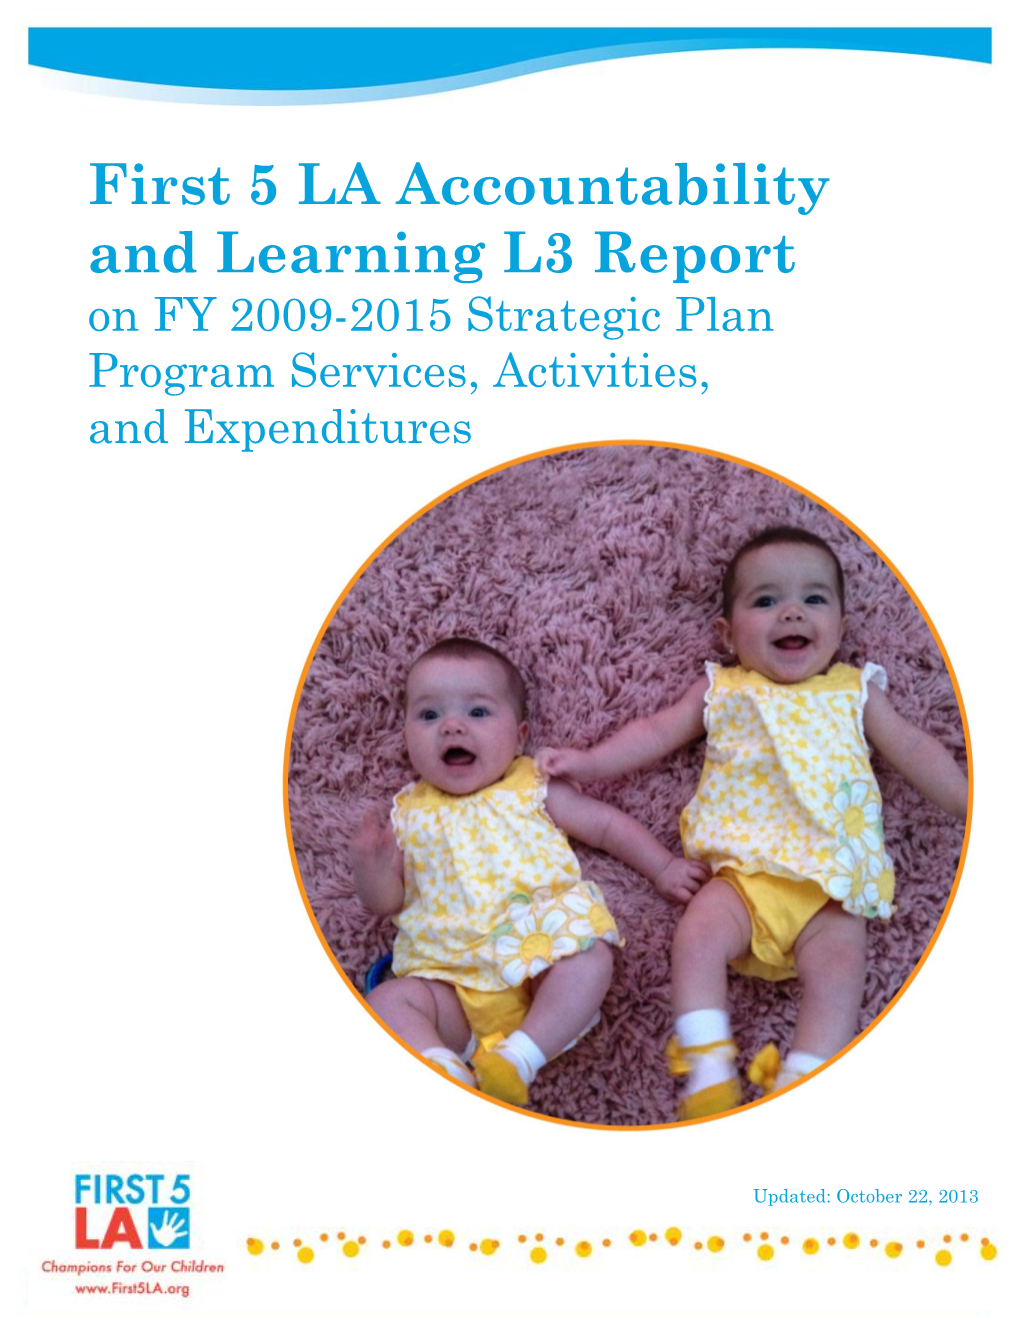 First 5 LA Accountability and Learning L3 Report on FY 2009-2015 Strategic Plan Program Services, Activities, and Expenditures